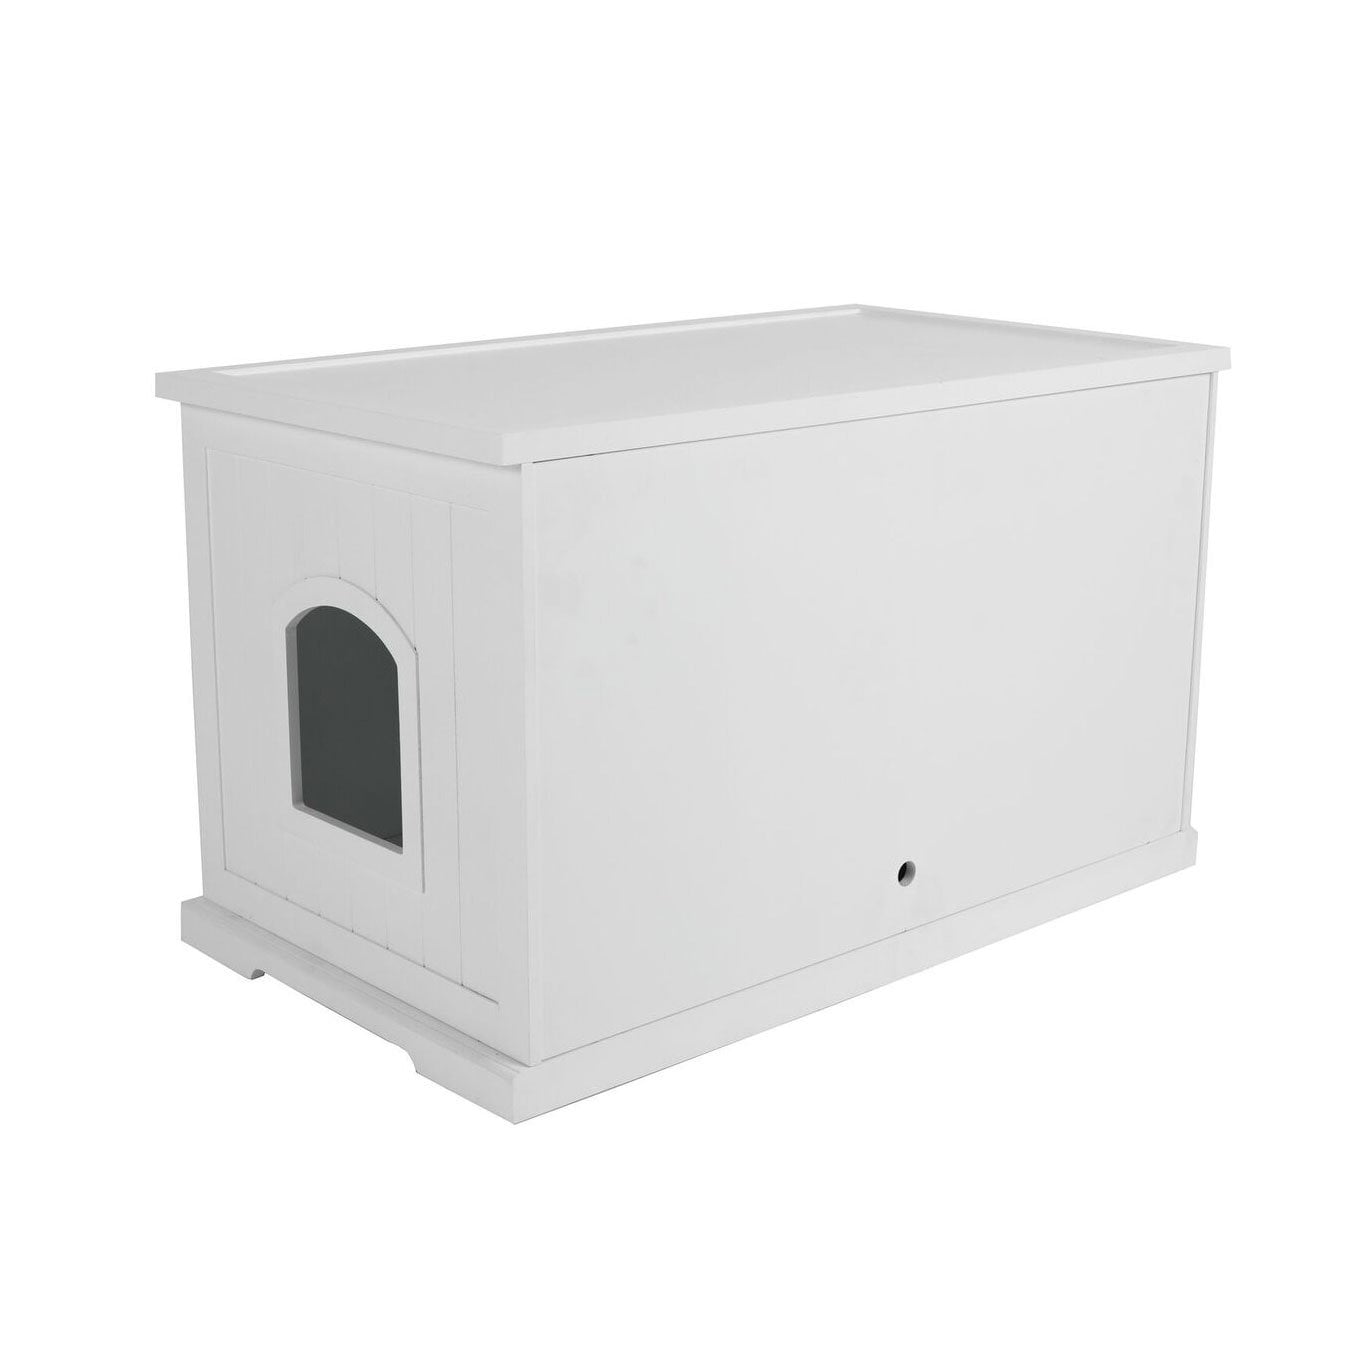 Merry Products Cat Washroom Bench w/ Enclosed Cat Litter Box Open Box White 